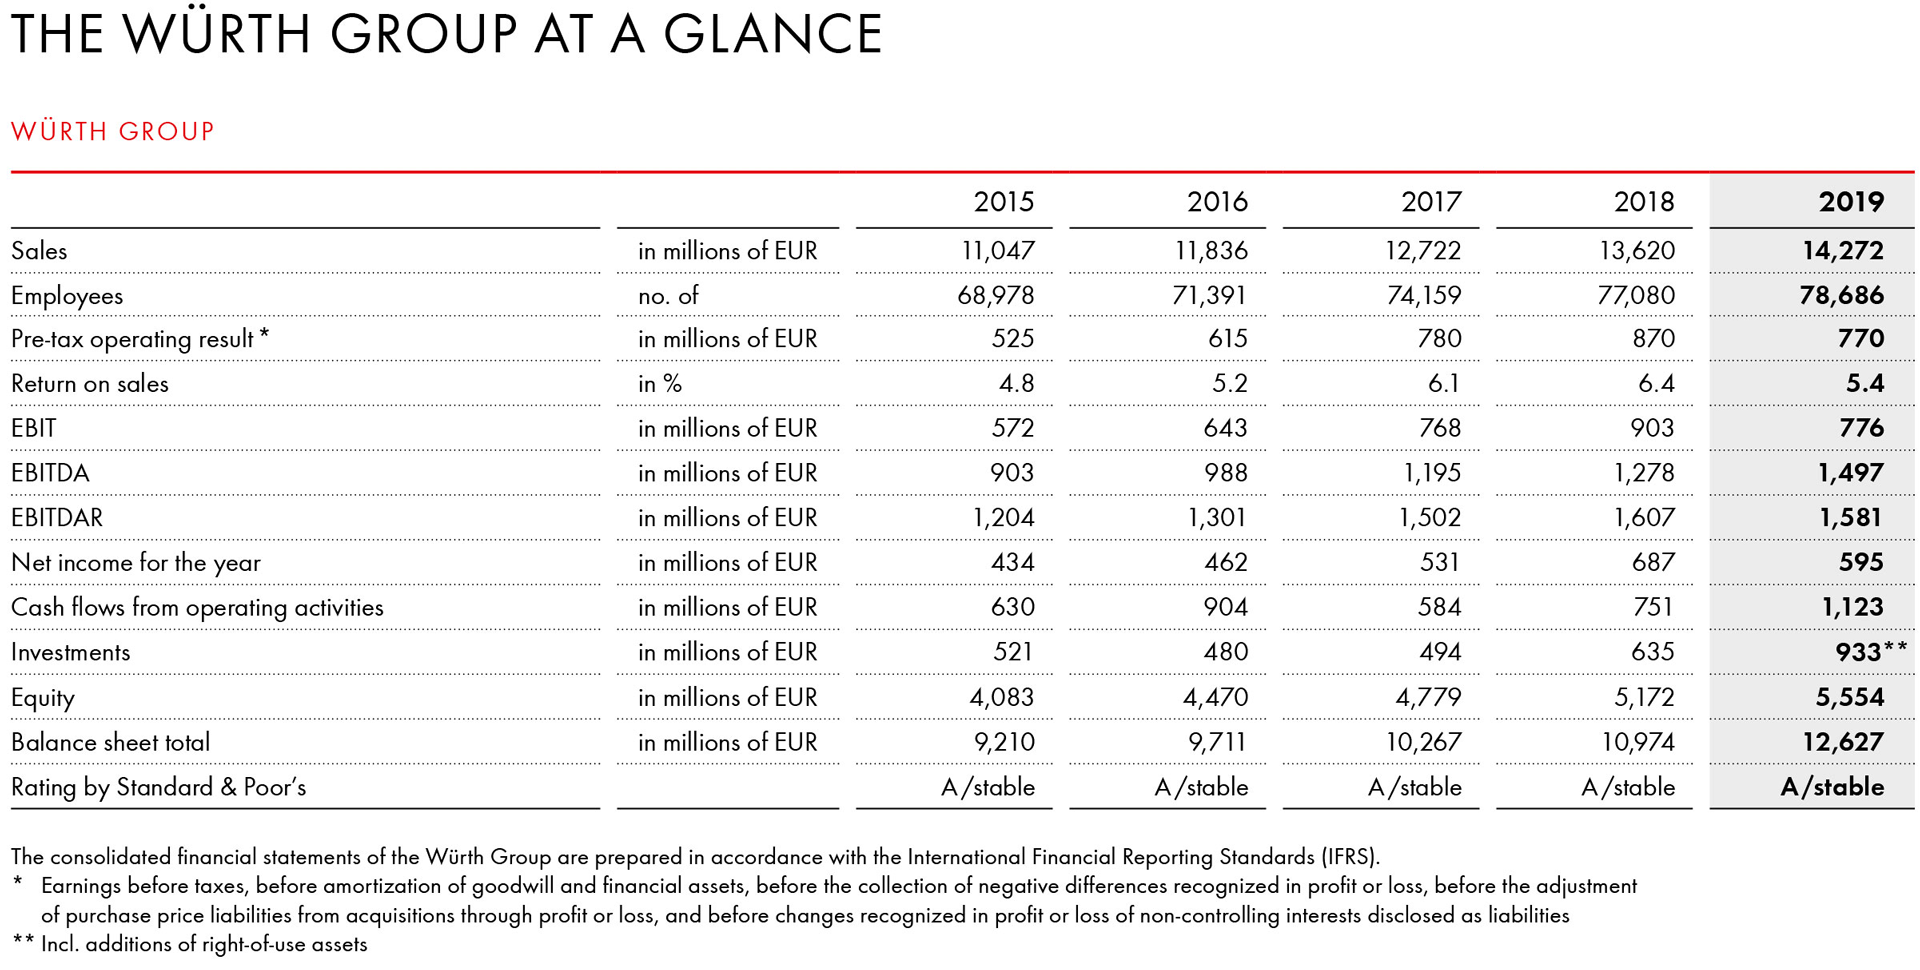 The Würth Group at a glance